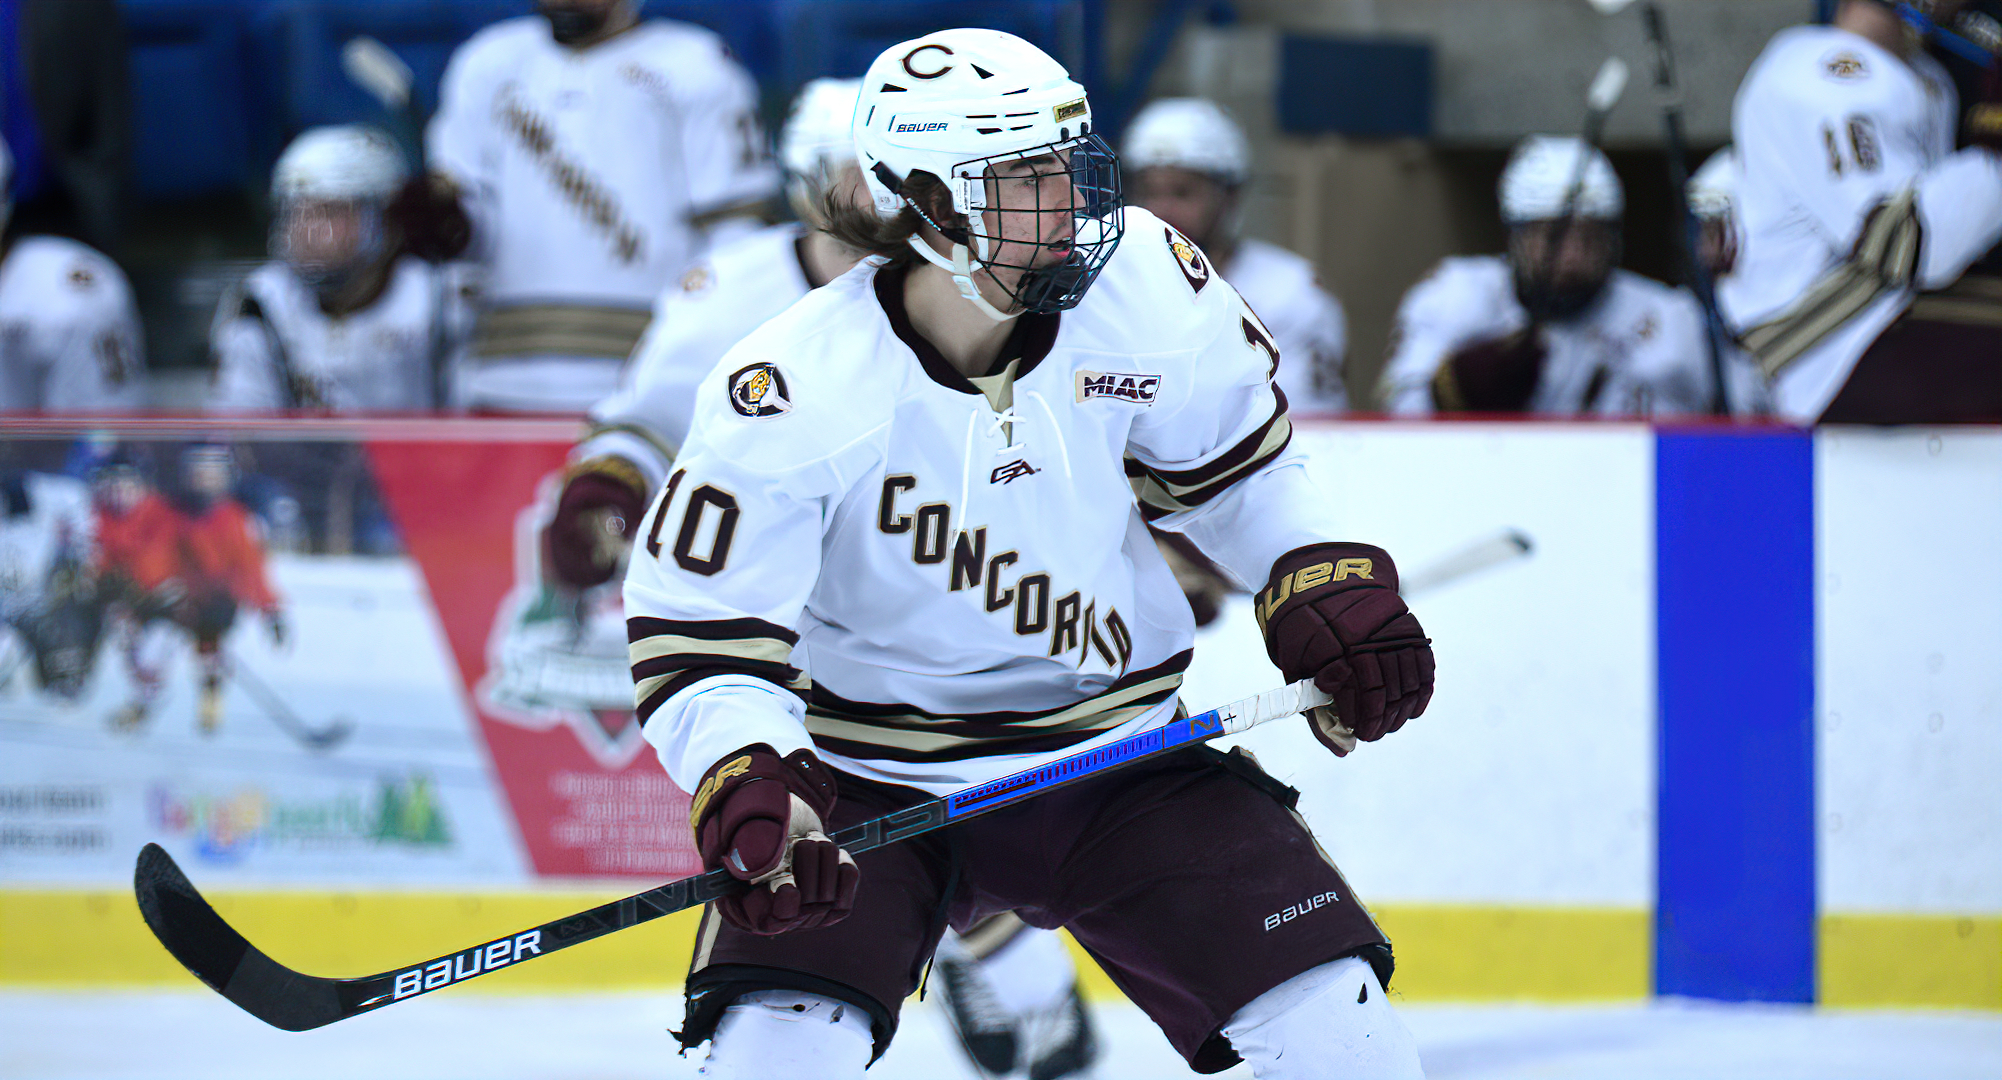 Freshman Hunter Olson picked the perfect time to score his first collegiate goal. He netted the game winner in the Cobbers' win at St. John's